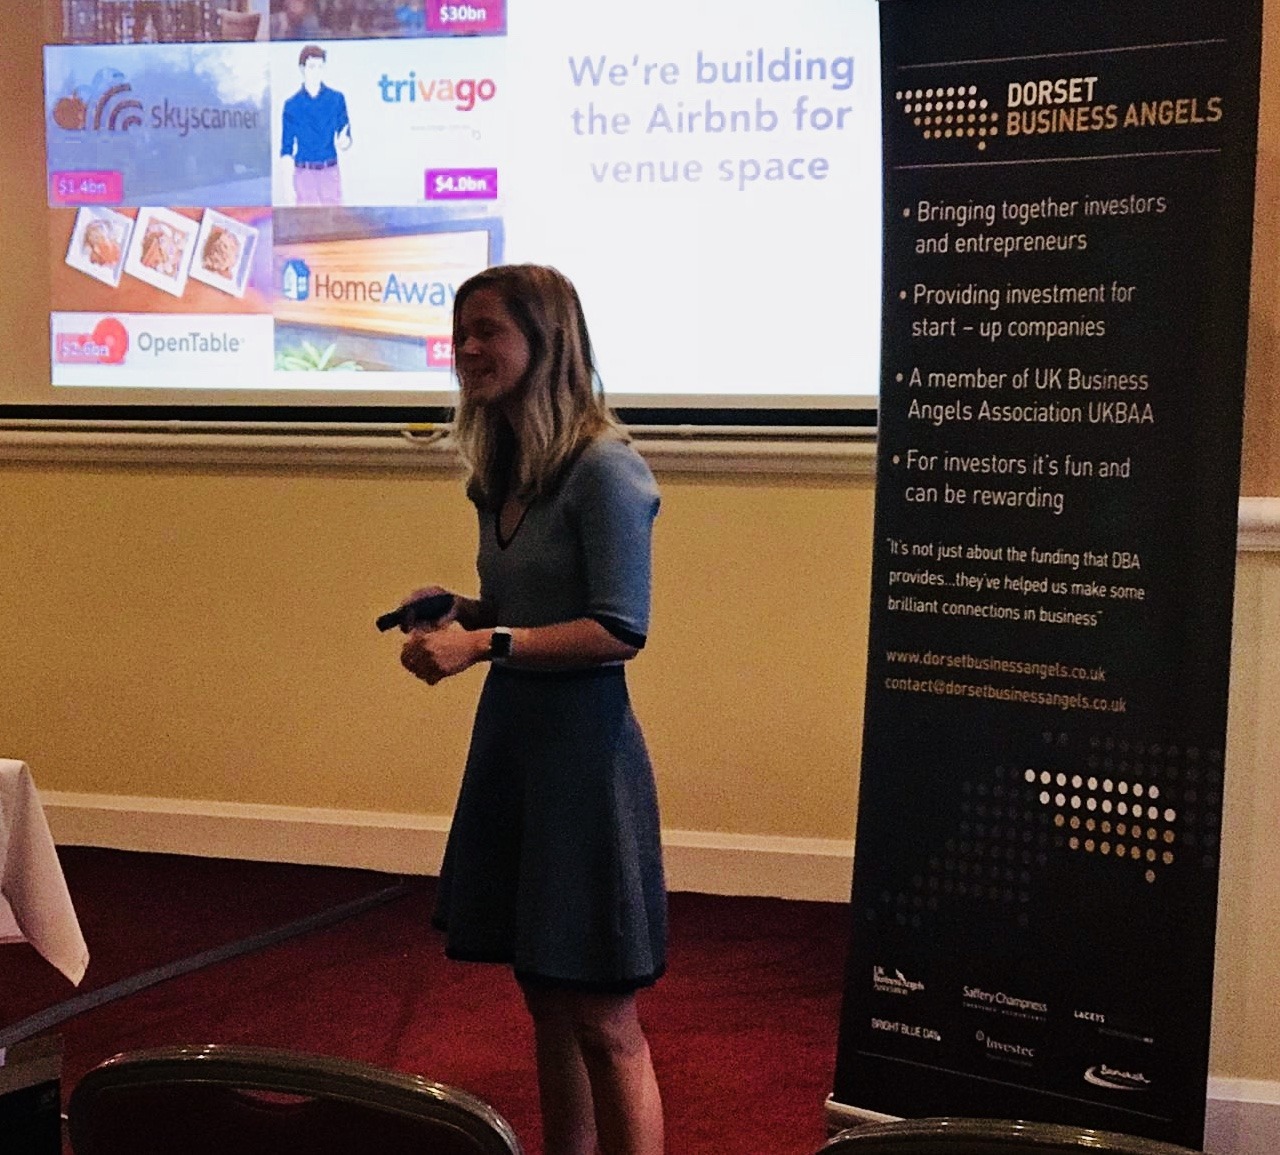 Medical science company, venue booking service, business connecting donors to charities and fitness company pitch to Dorset Business Angels 